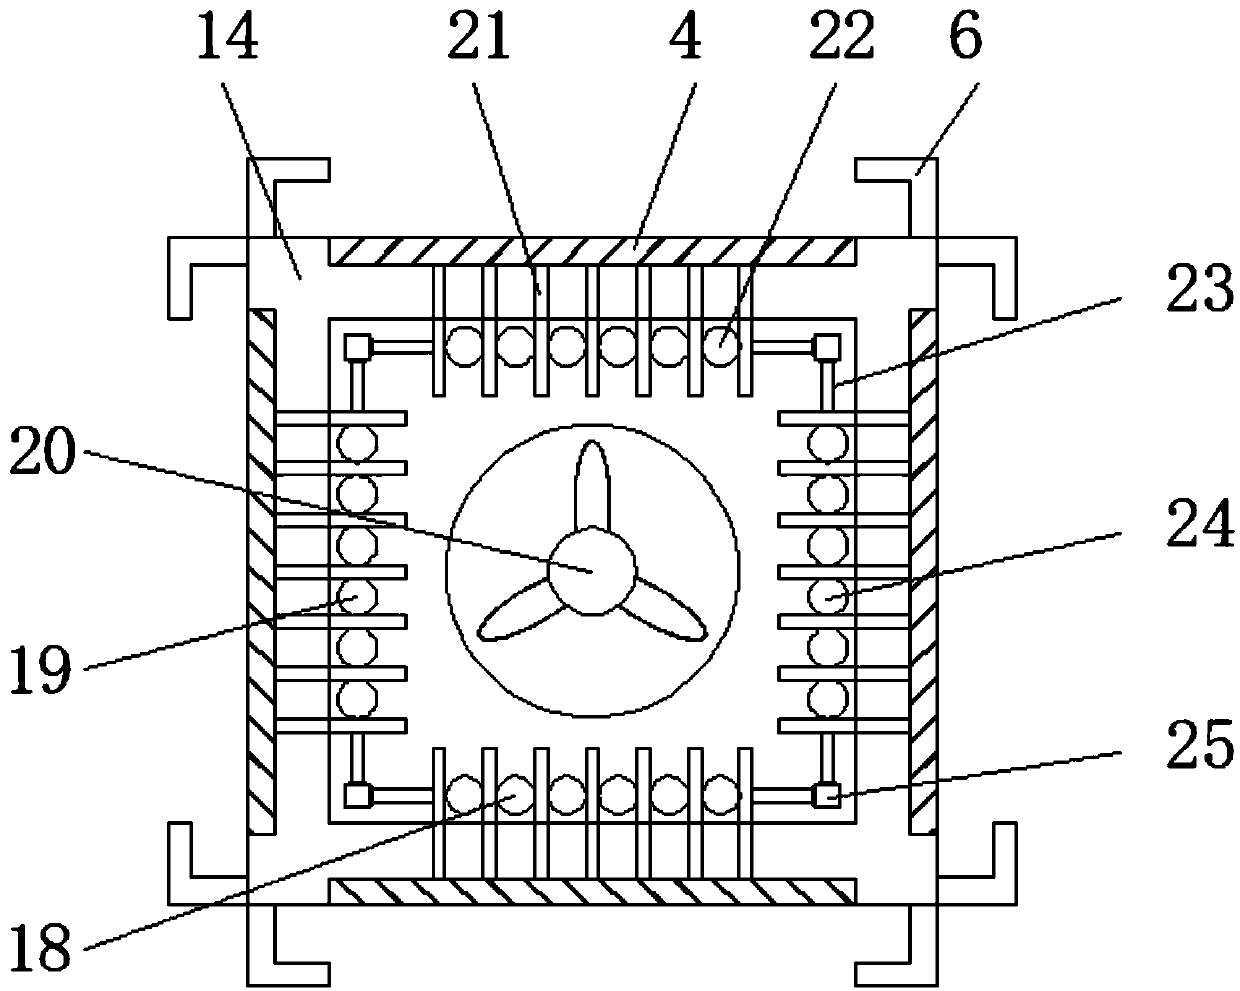 Controller fixing frame of a power and reactive power compensation system, which is convenient to disassemble and install